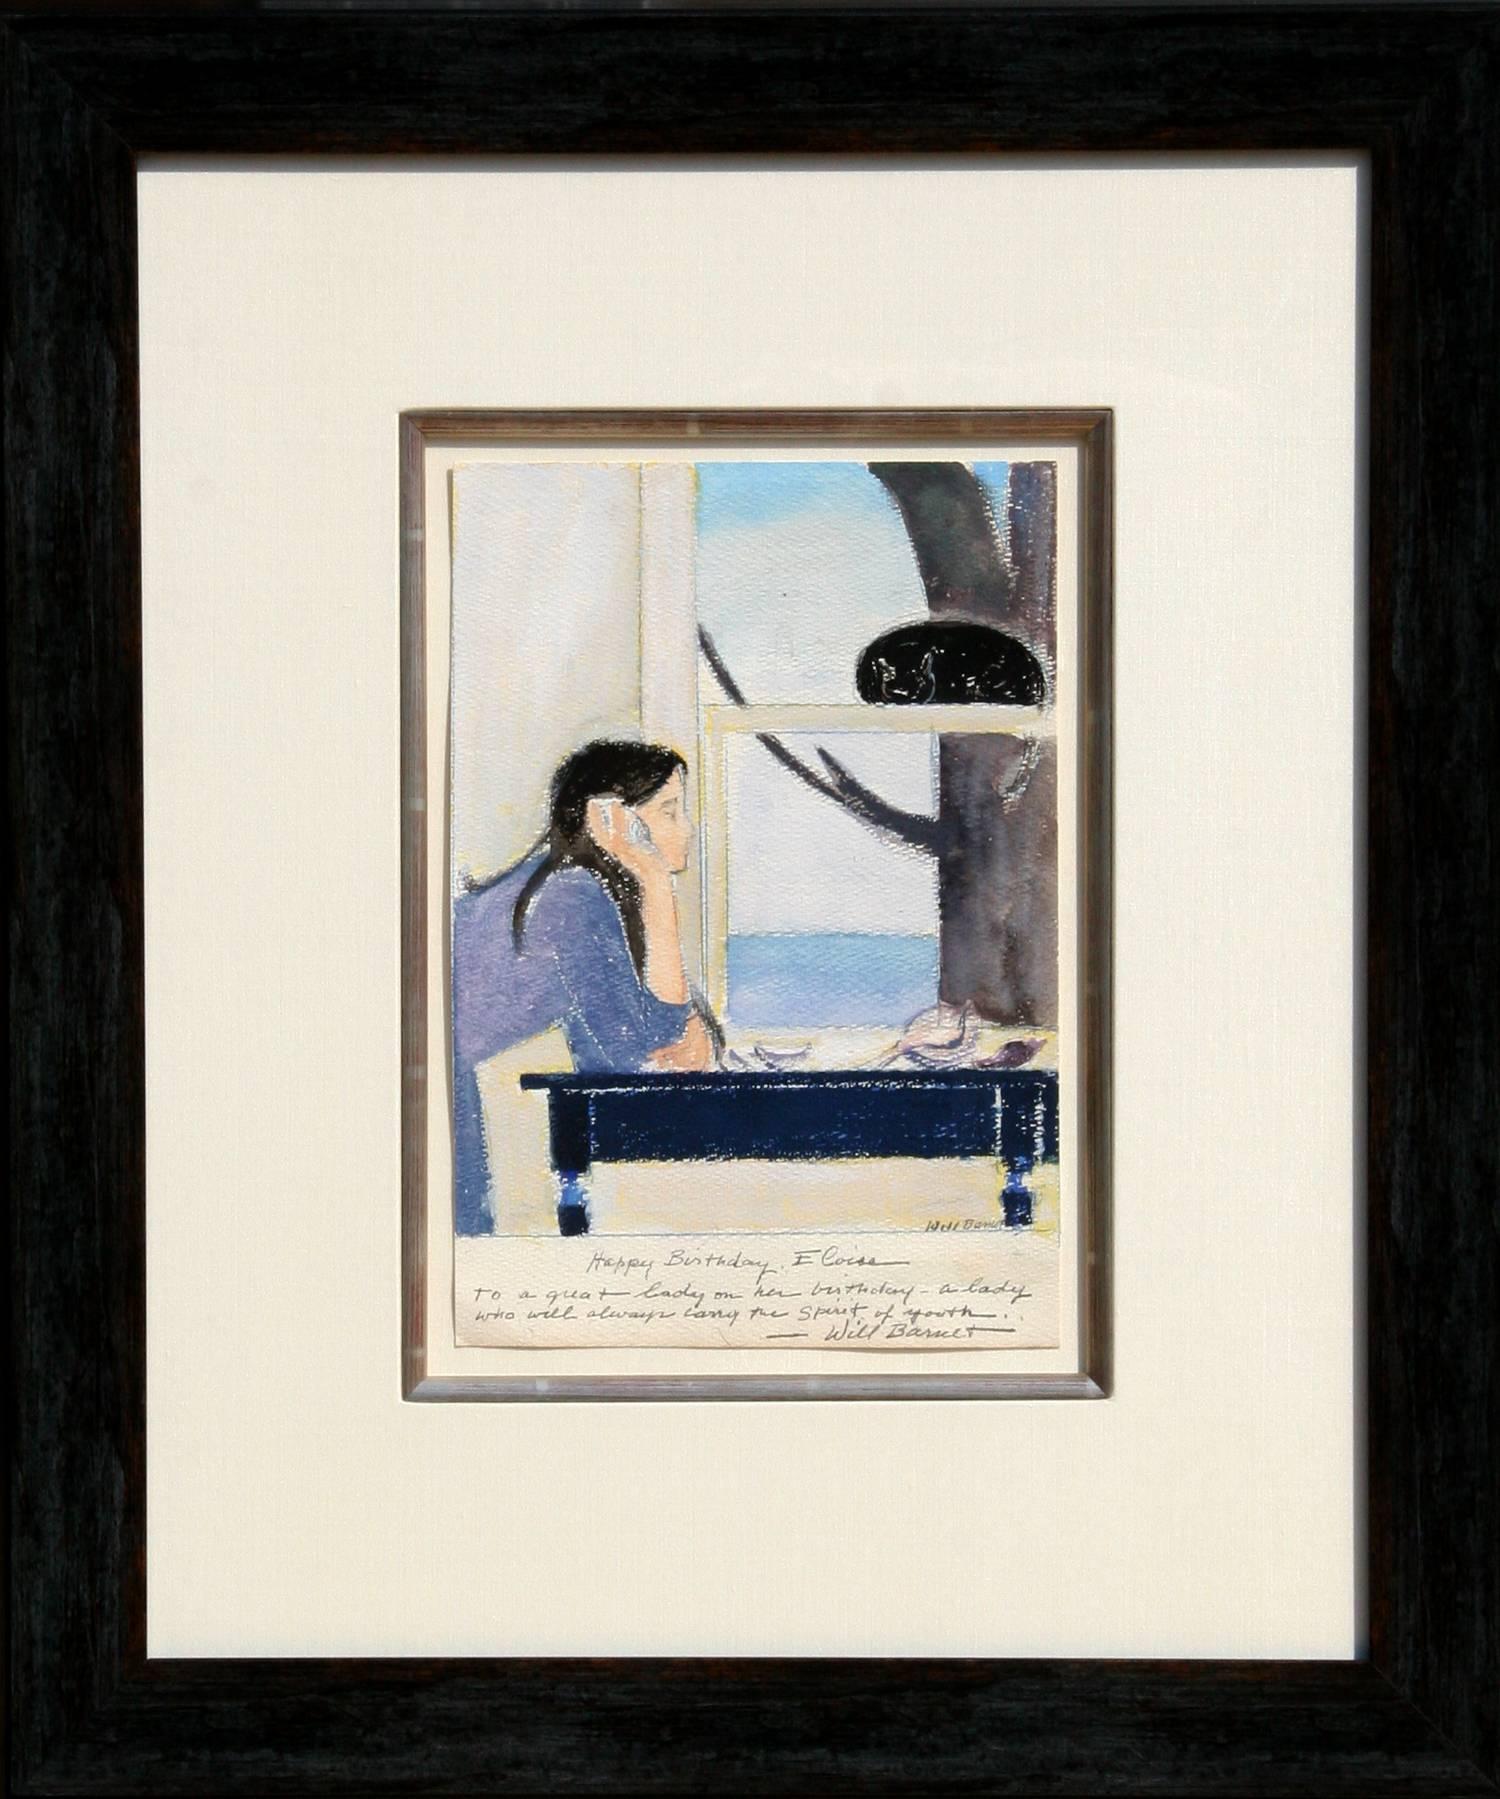 Artist: Will Barnet, American (1911 - 2012)
Title: Spirit of Youth
Year: circa 1980
Medium: Watercolor and Pastel on Paper, signed and dedicated
Size: 11 in. x 7.5 in. (27.94 cm x 19.05 cm)
Frame Size: 23 x 19 inches 